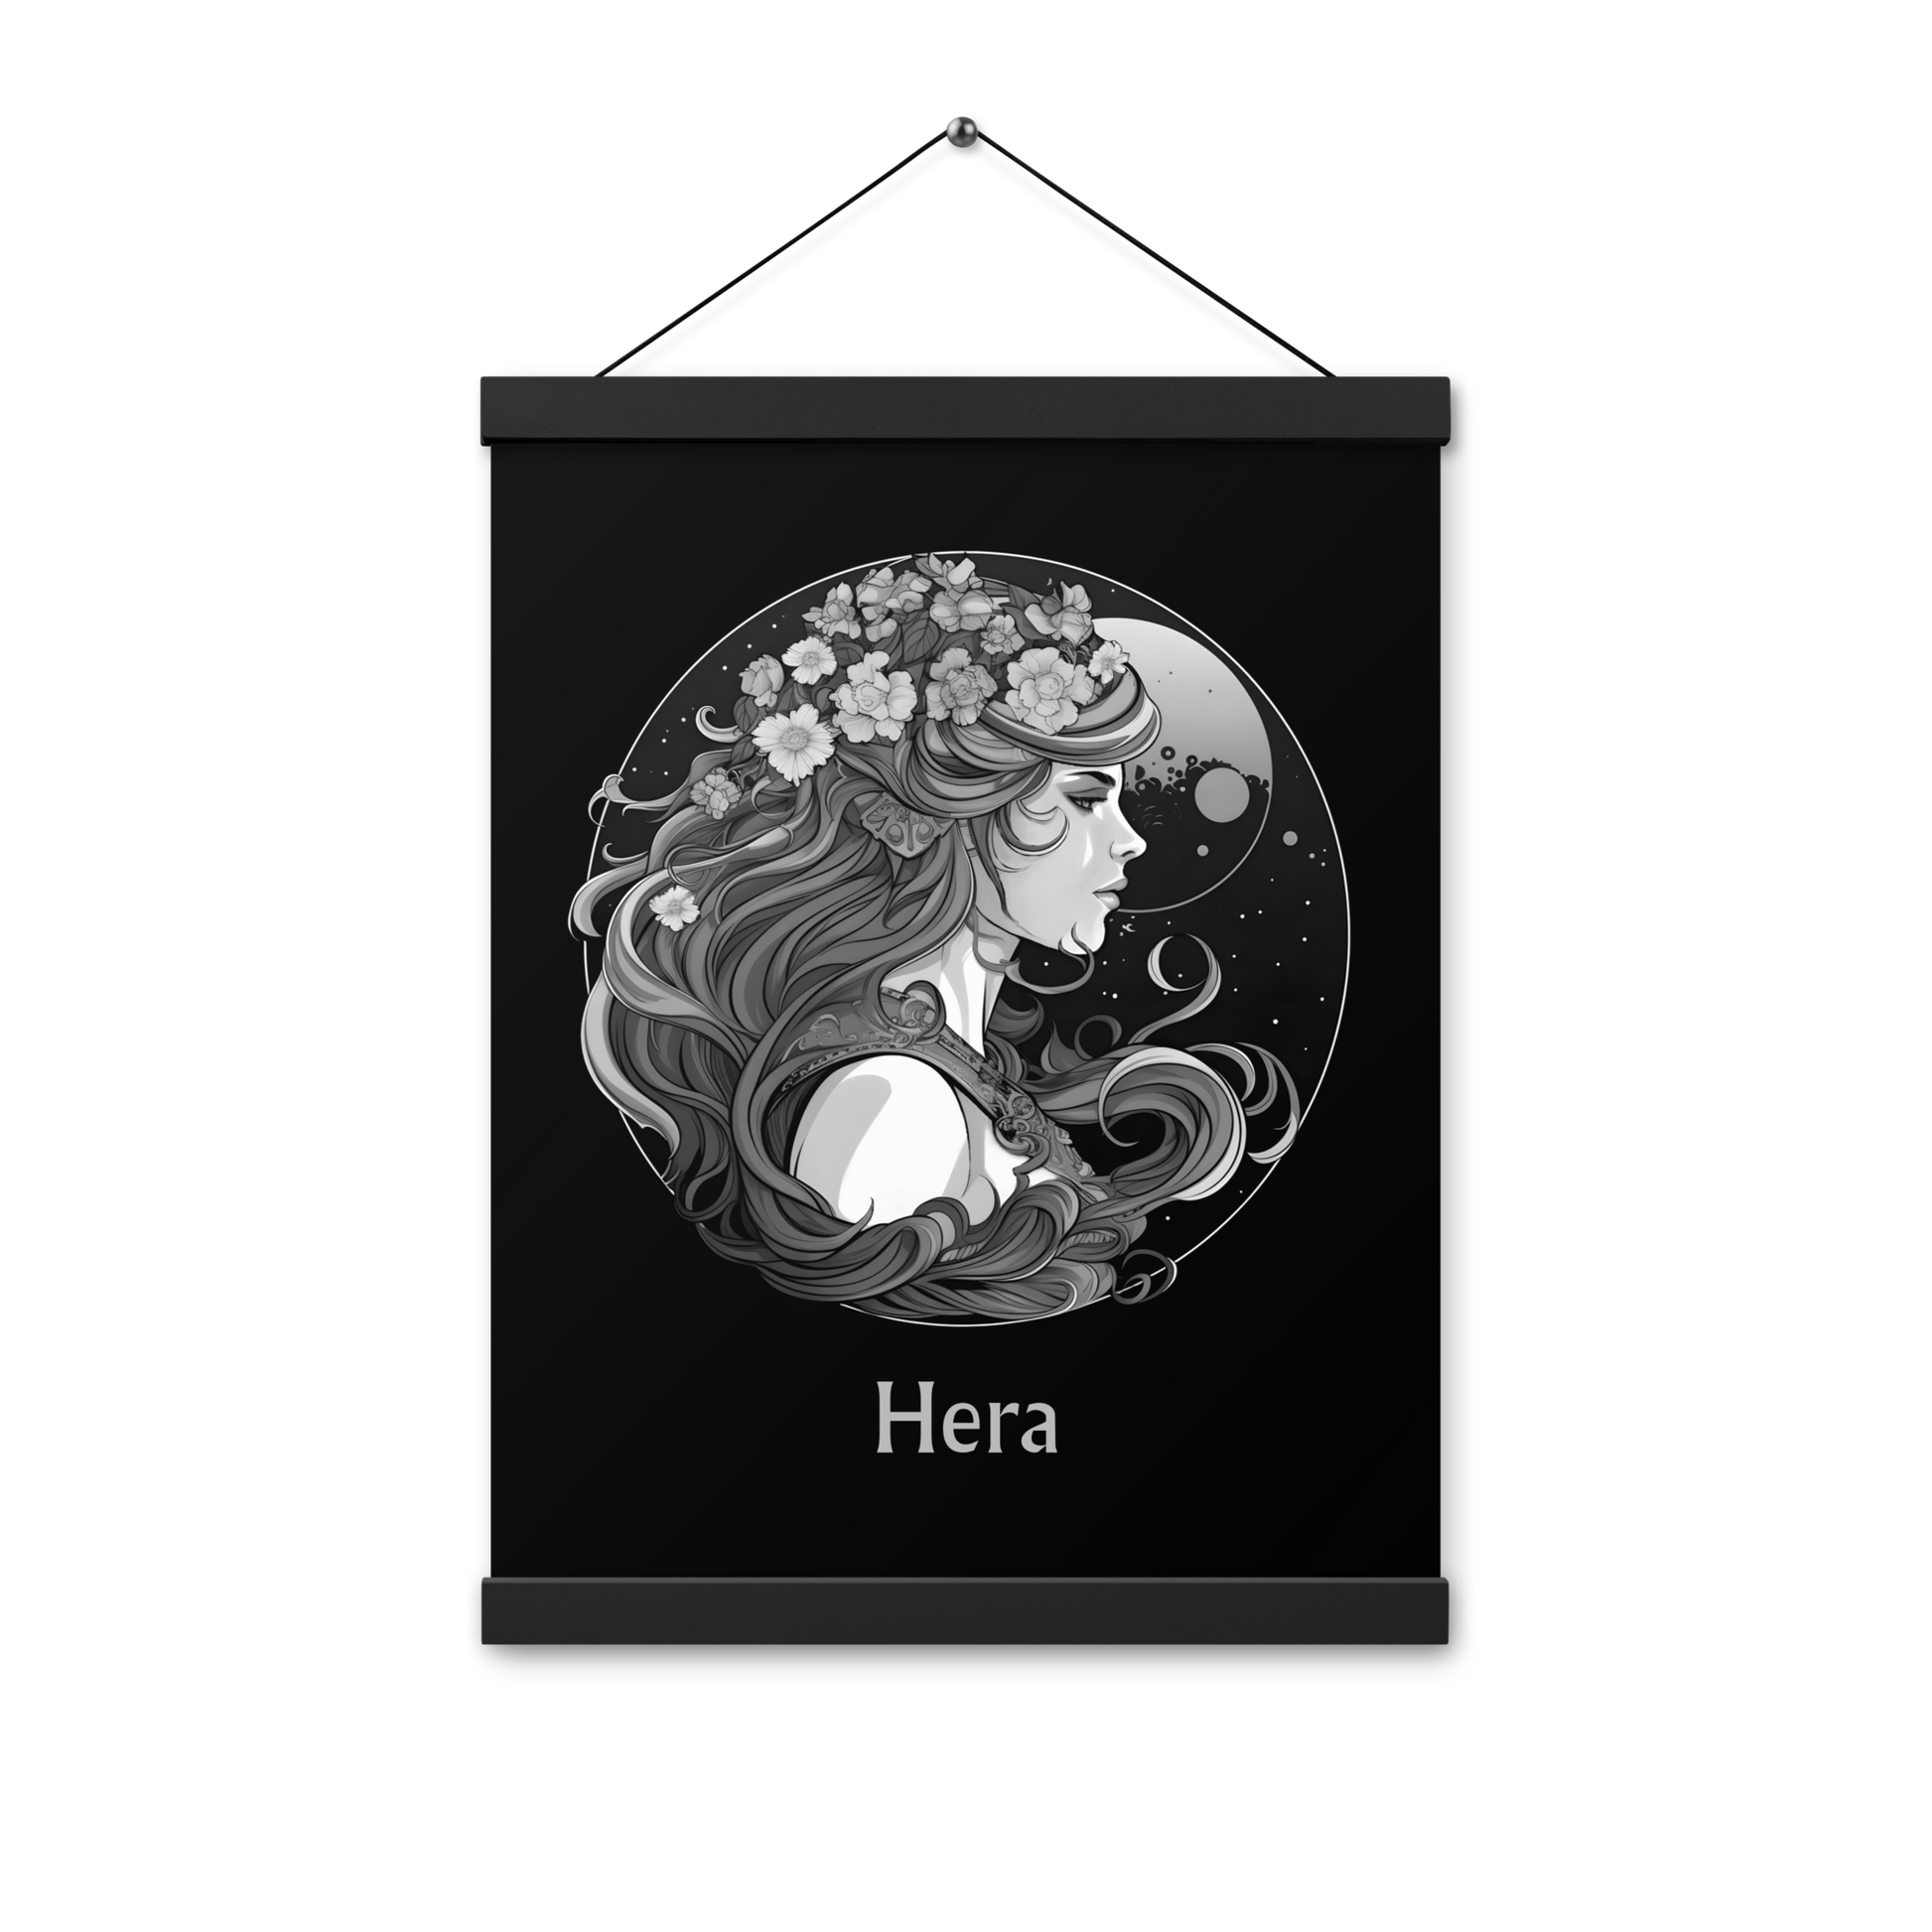 Hera's Devotion - Black and White Hanging Wall Art High Quality Matte Poster DrawDadDraw